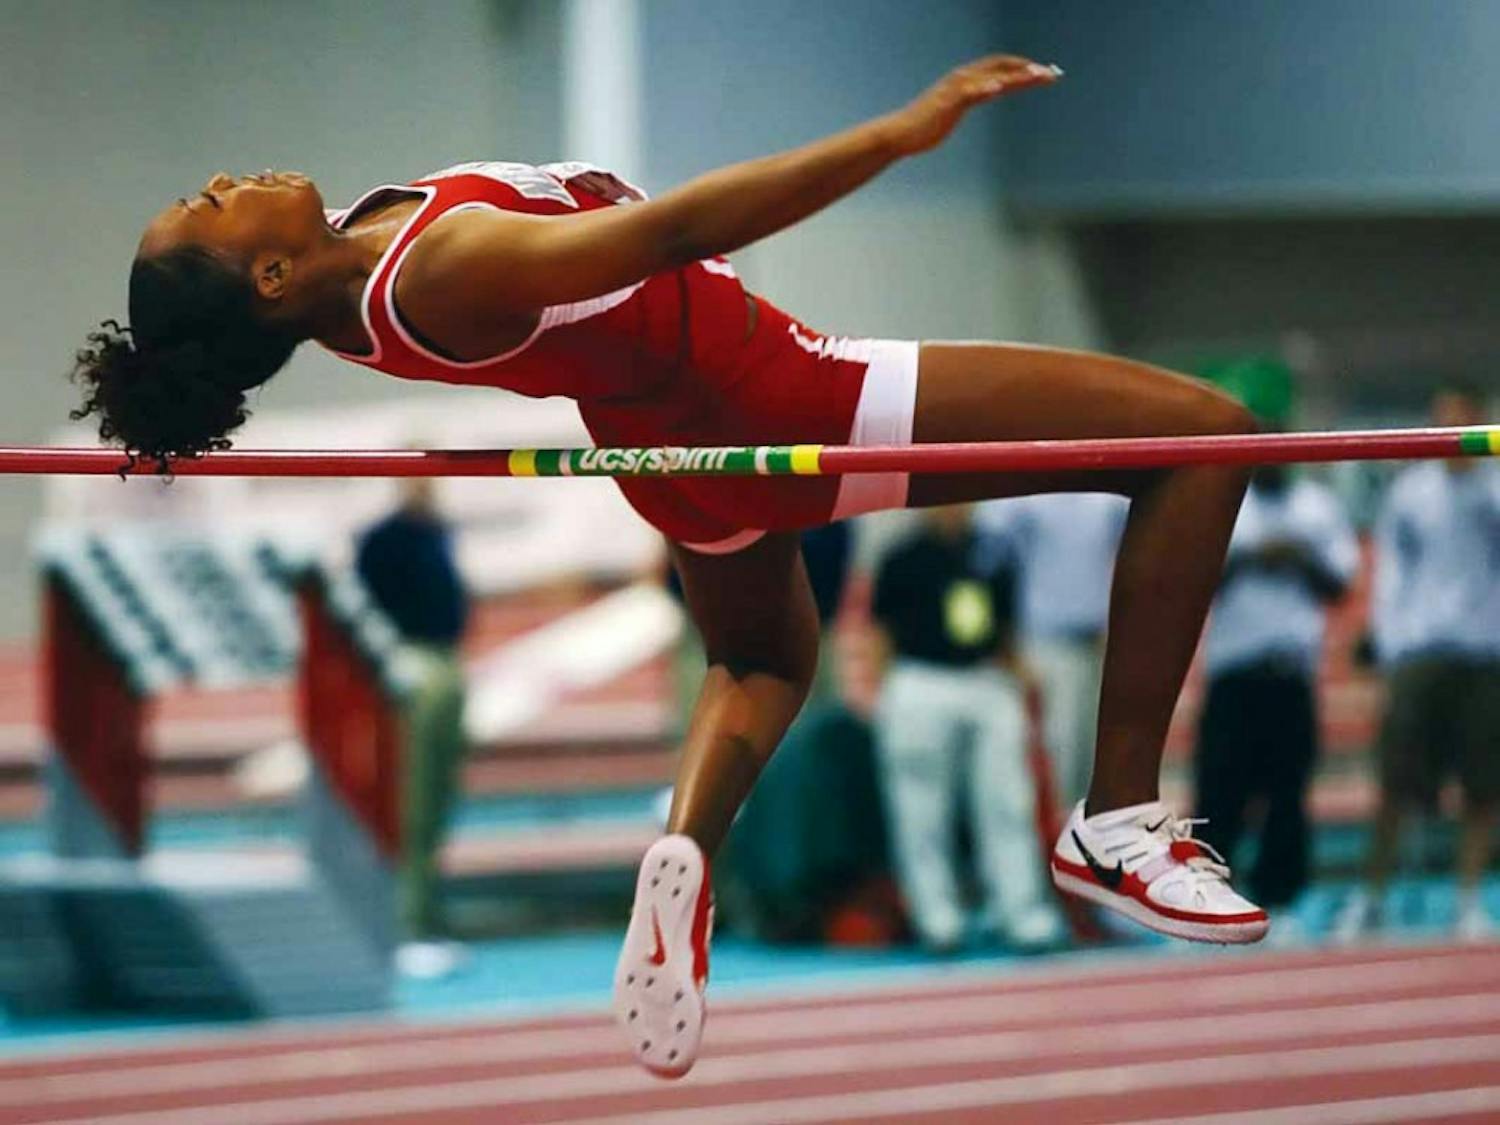 Tiyana Peters competes in the high jump during the 2007 MWC Indoor Championships on Feb. 24 at the Albuquerque Convention Center. Last weekend, she competed in the Clyde Littlefield Texas Relays, clearing 5-8 3/4 to defeat a field of 19 in Austin, Texas.